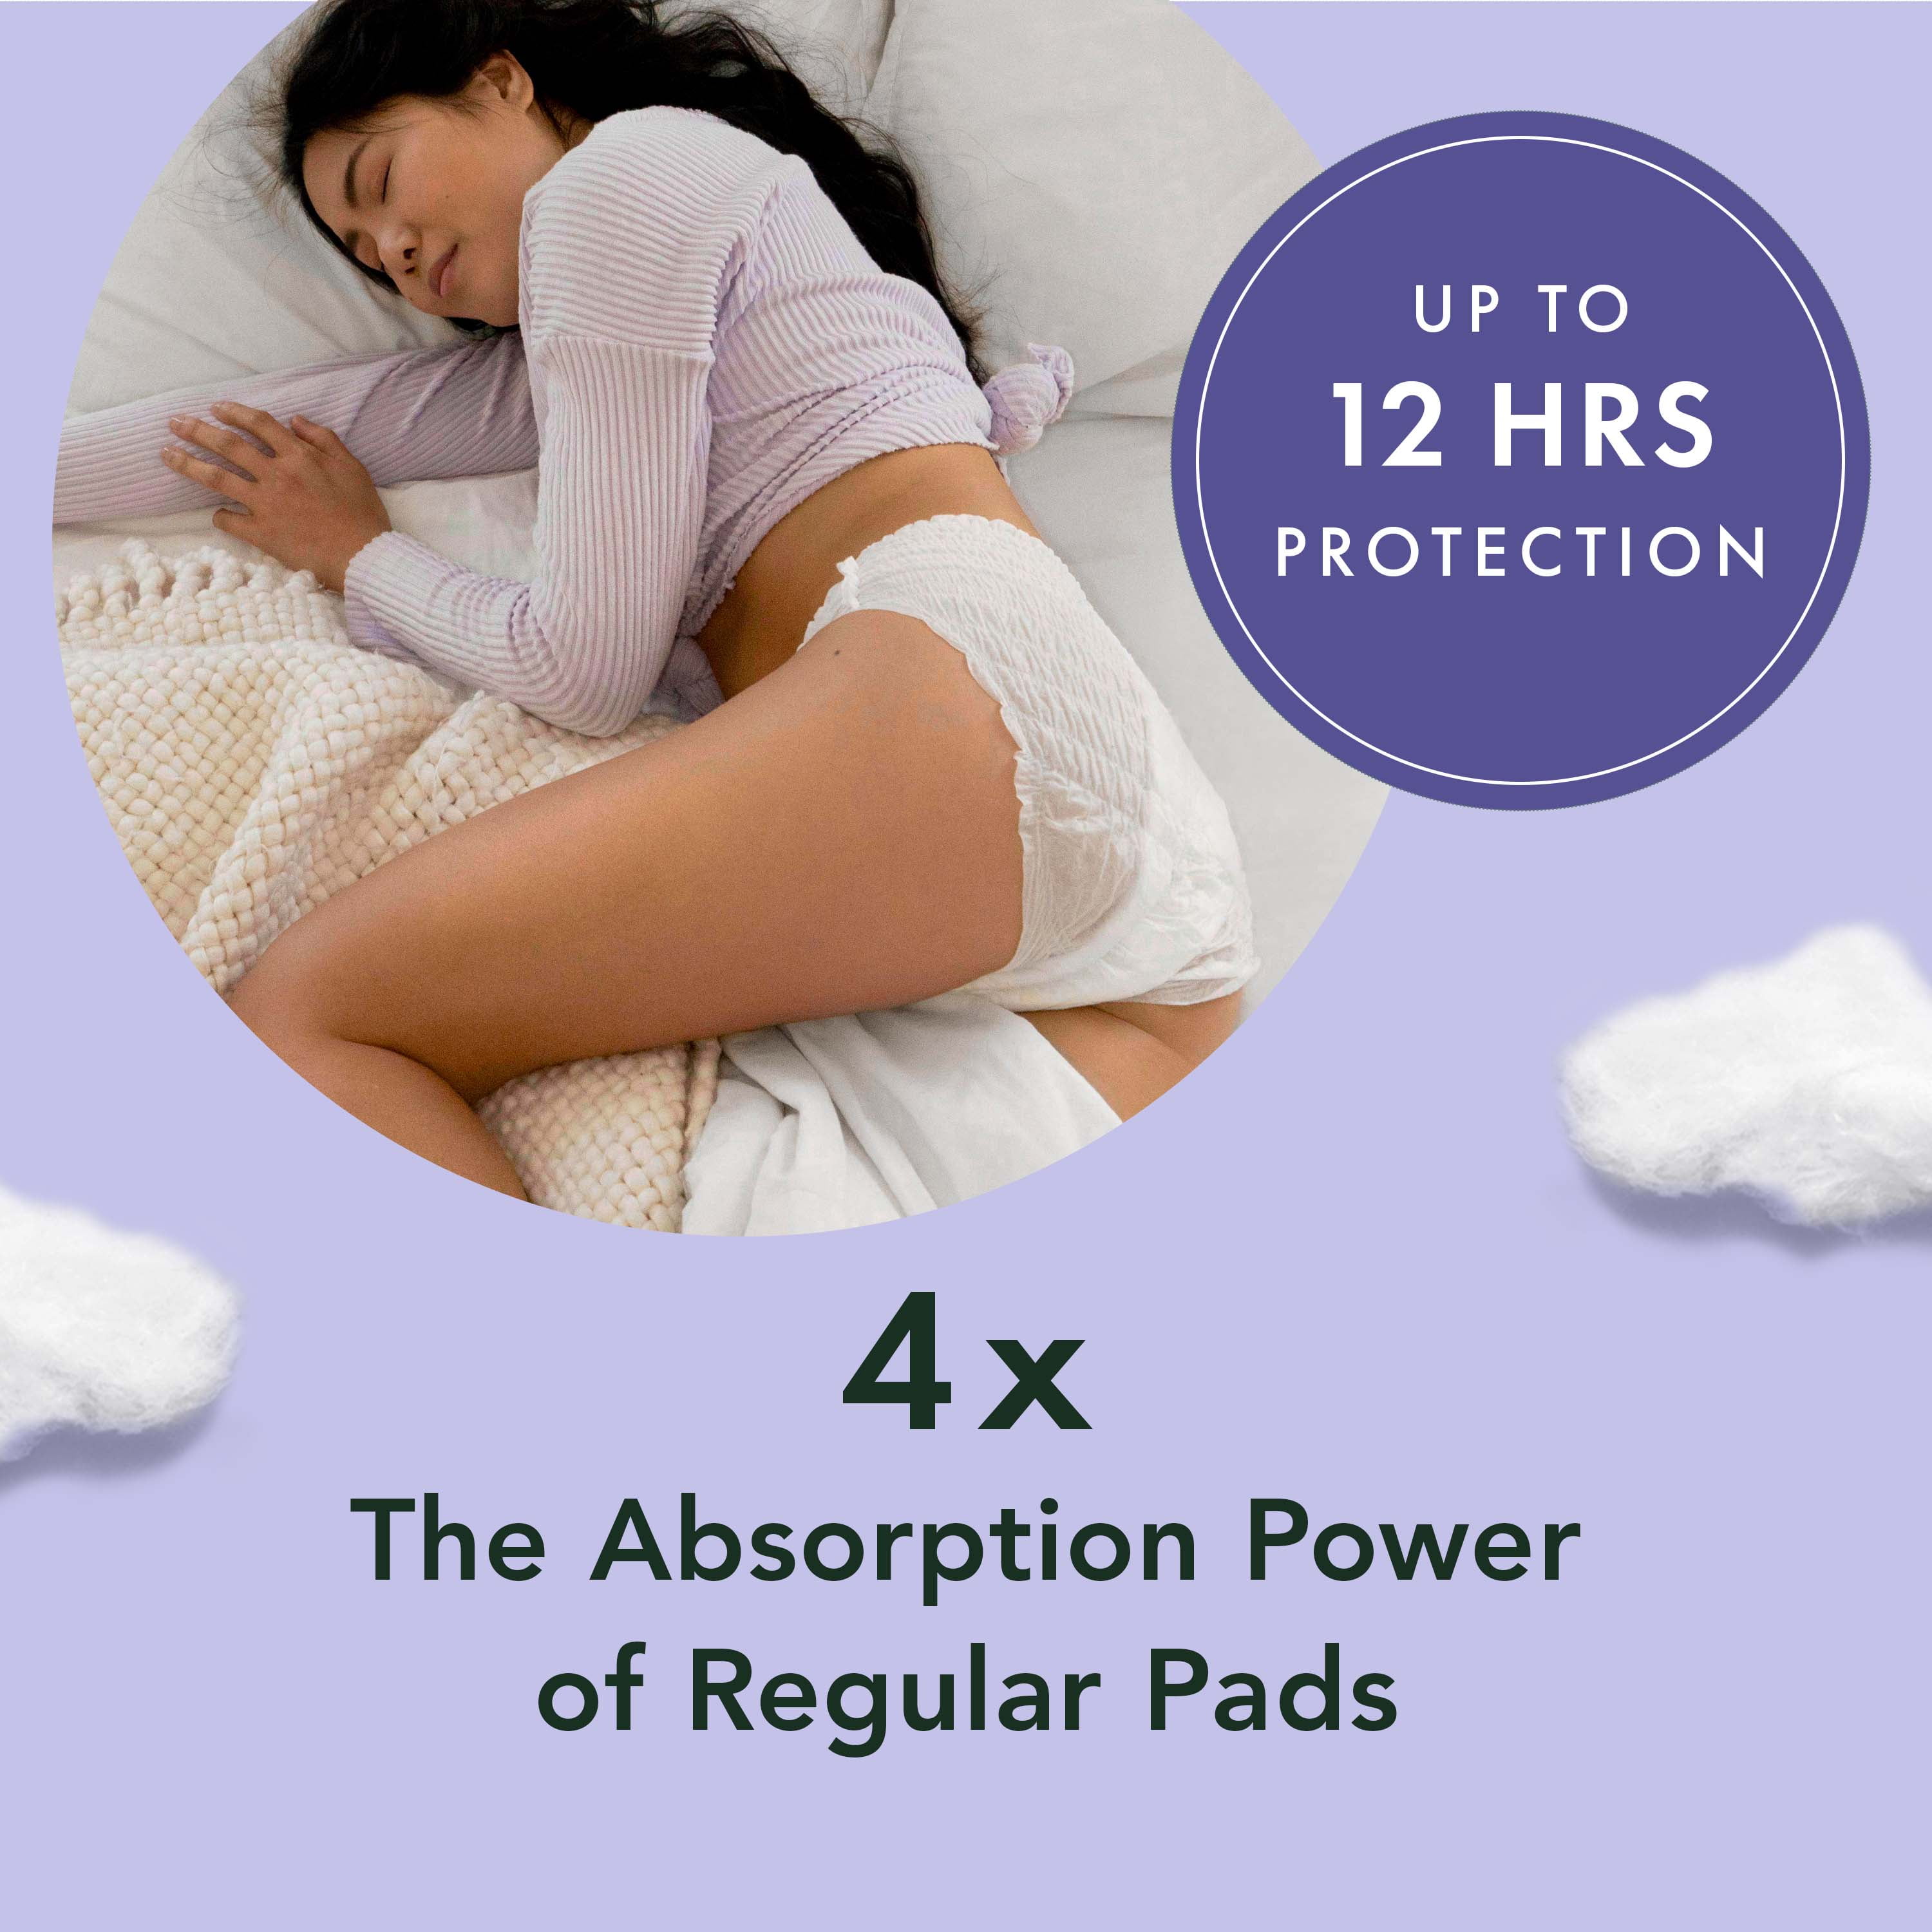 Rael Organic Disposable Period Underwear for Postpartum and Heavy Flows,  L/XL, 8 Ct 